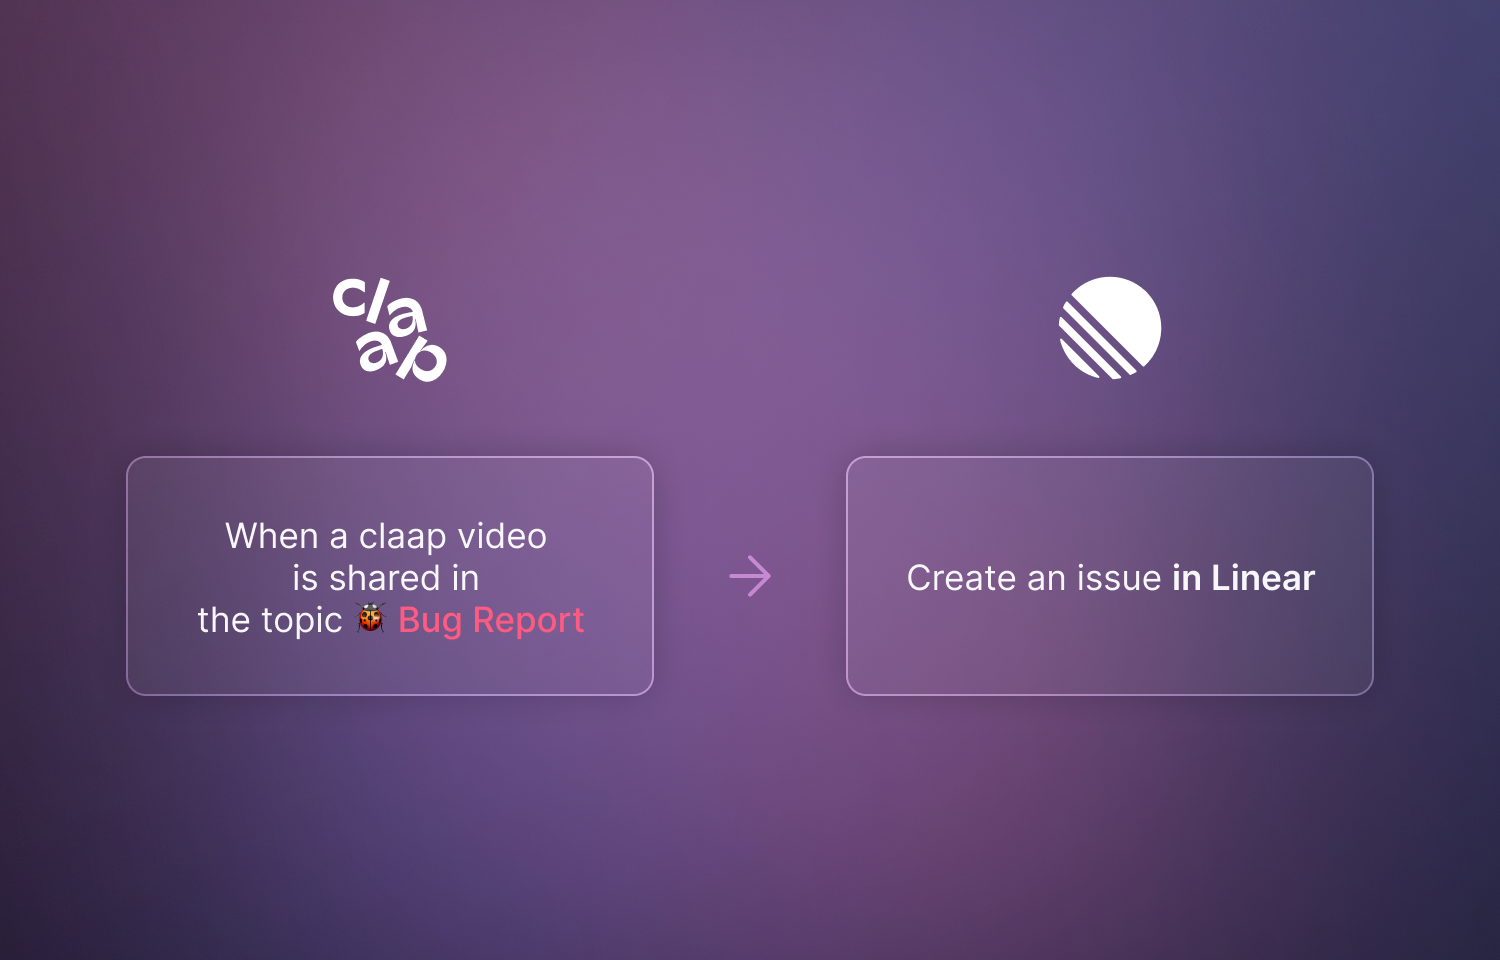 Claap icon and Linear icon showing you can create issues in Linear 